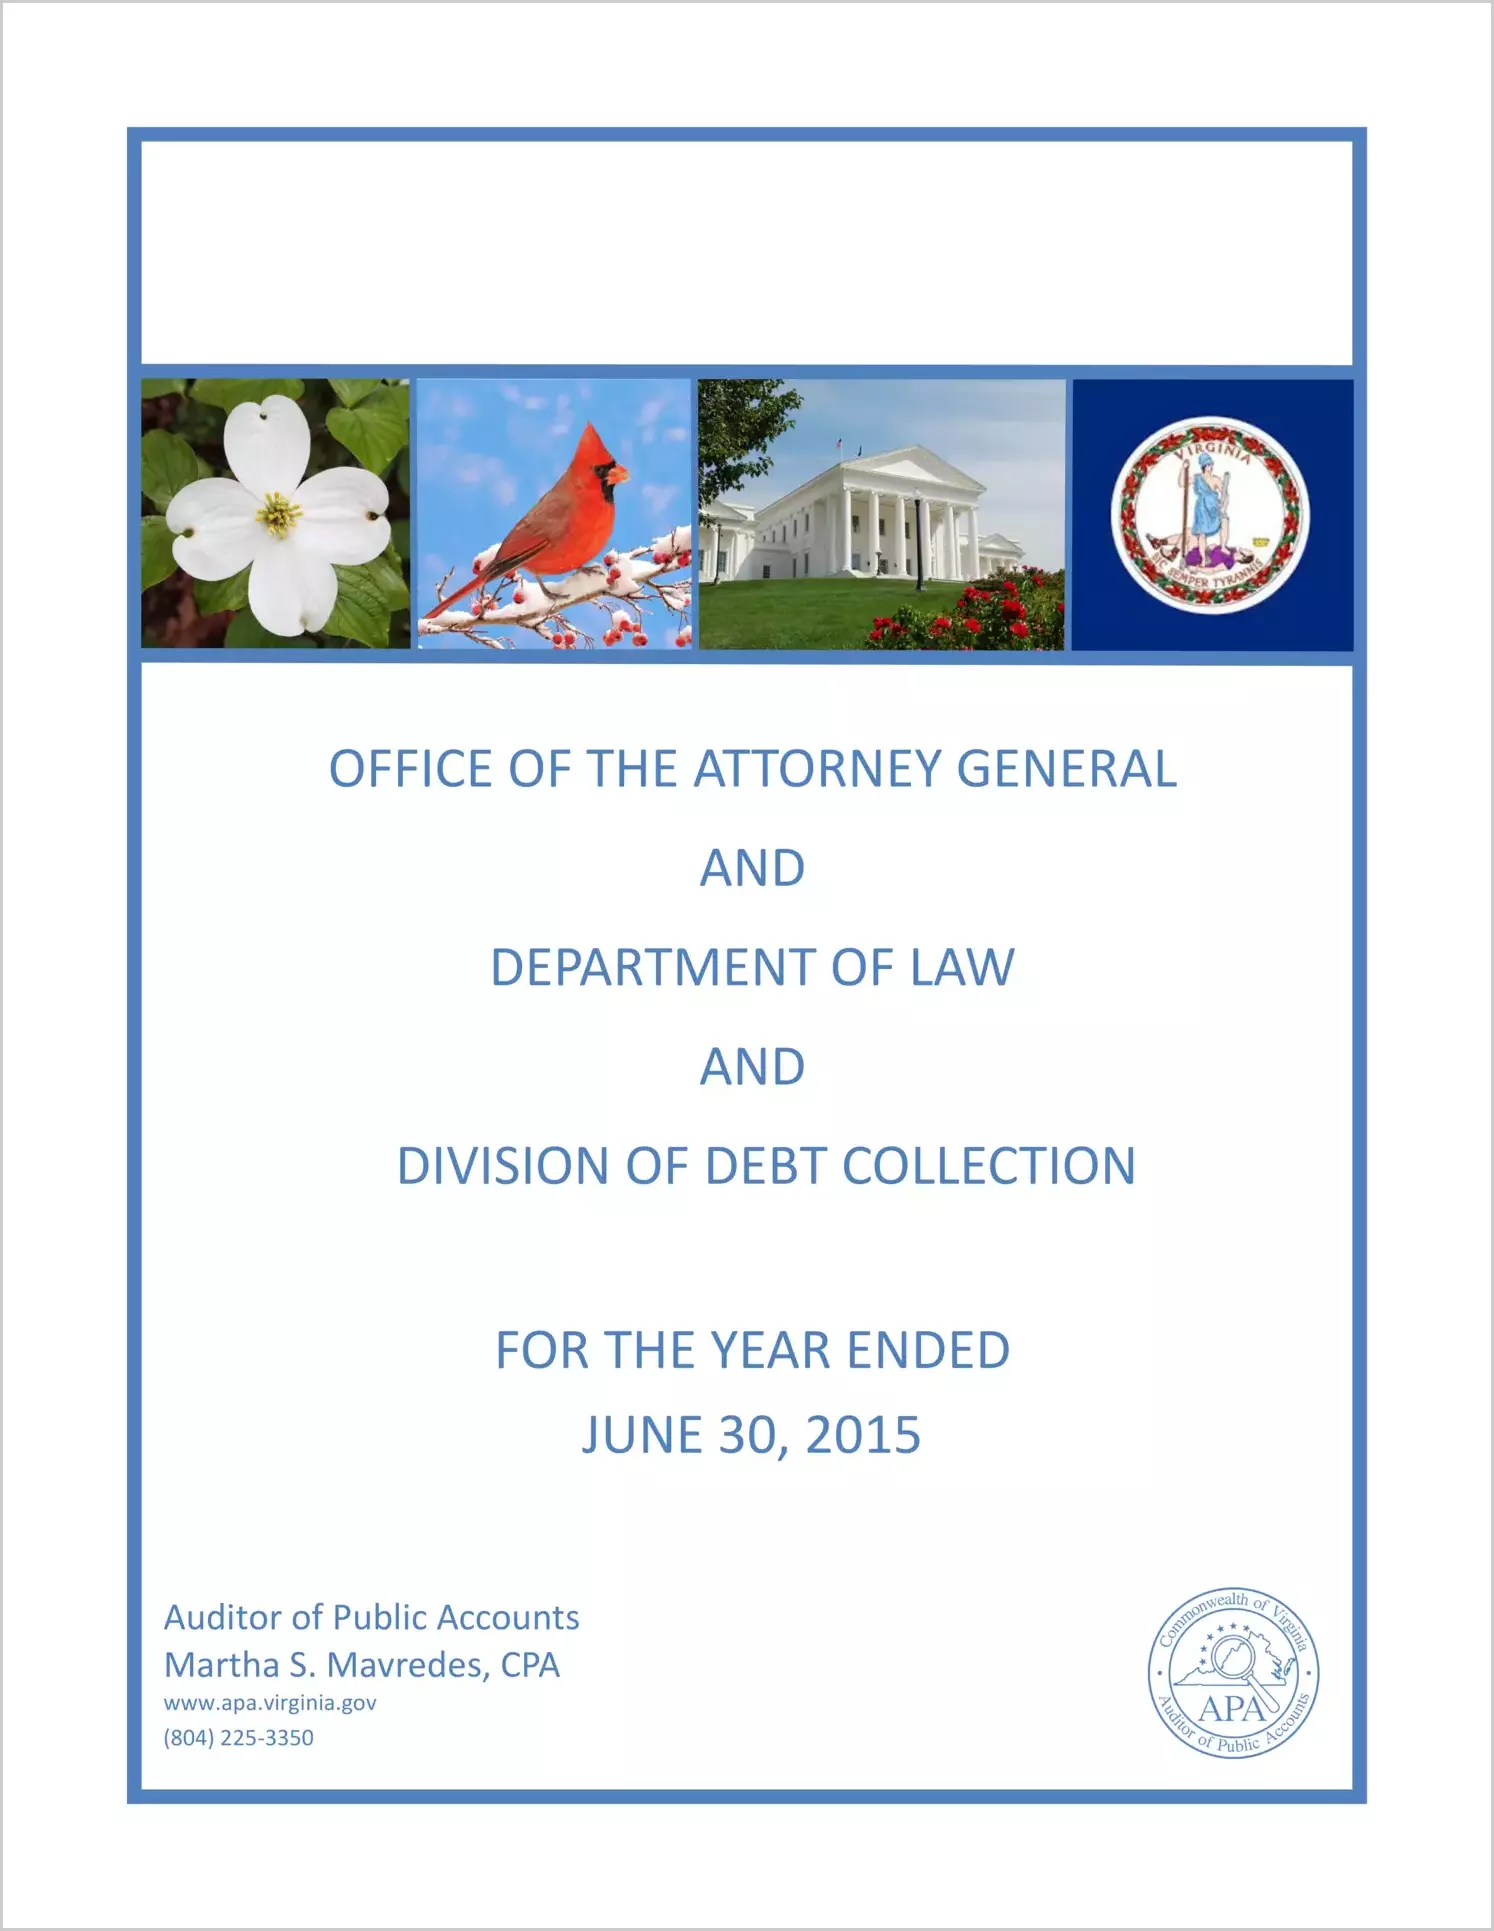 Office Of The Attorney General And Department Of Law And Division of Debt Collection Report On Audit For The Year Ended June 30, 2015